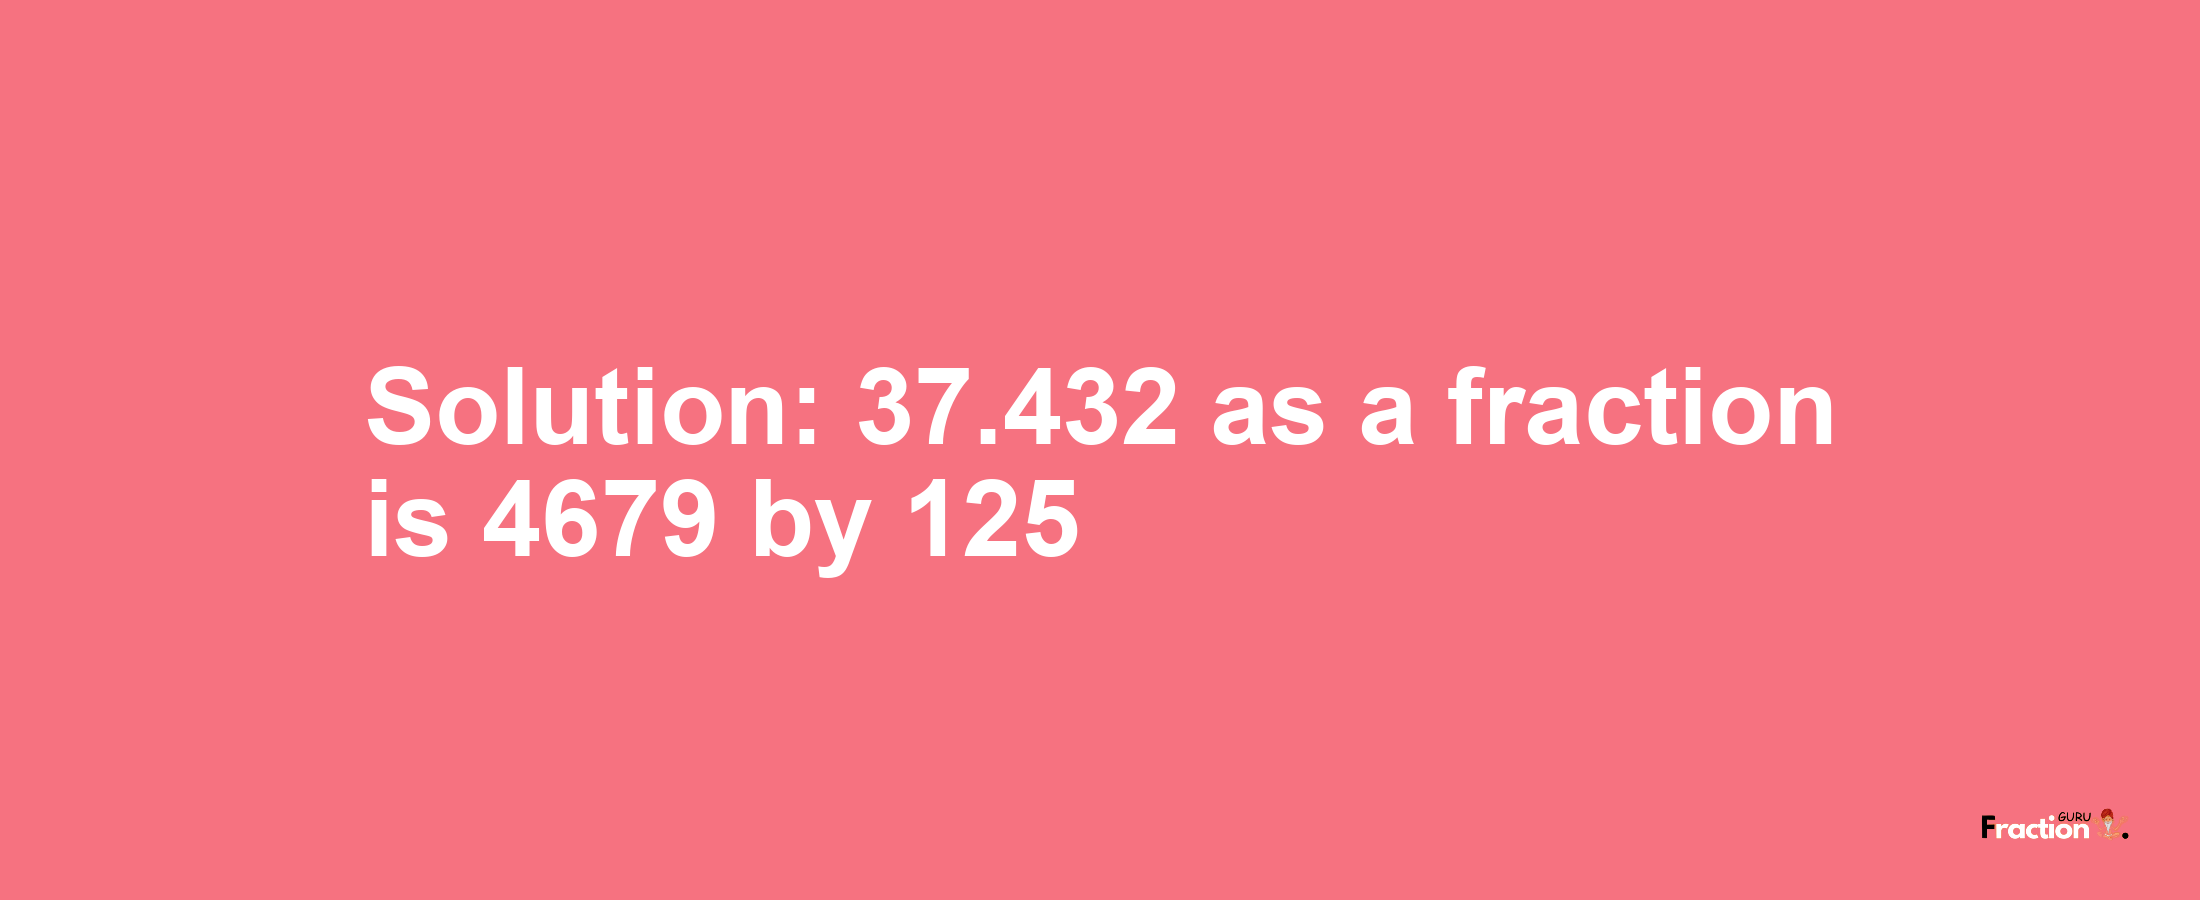 Solution:37.432 as a fraction is 4679/125